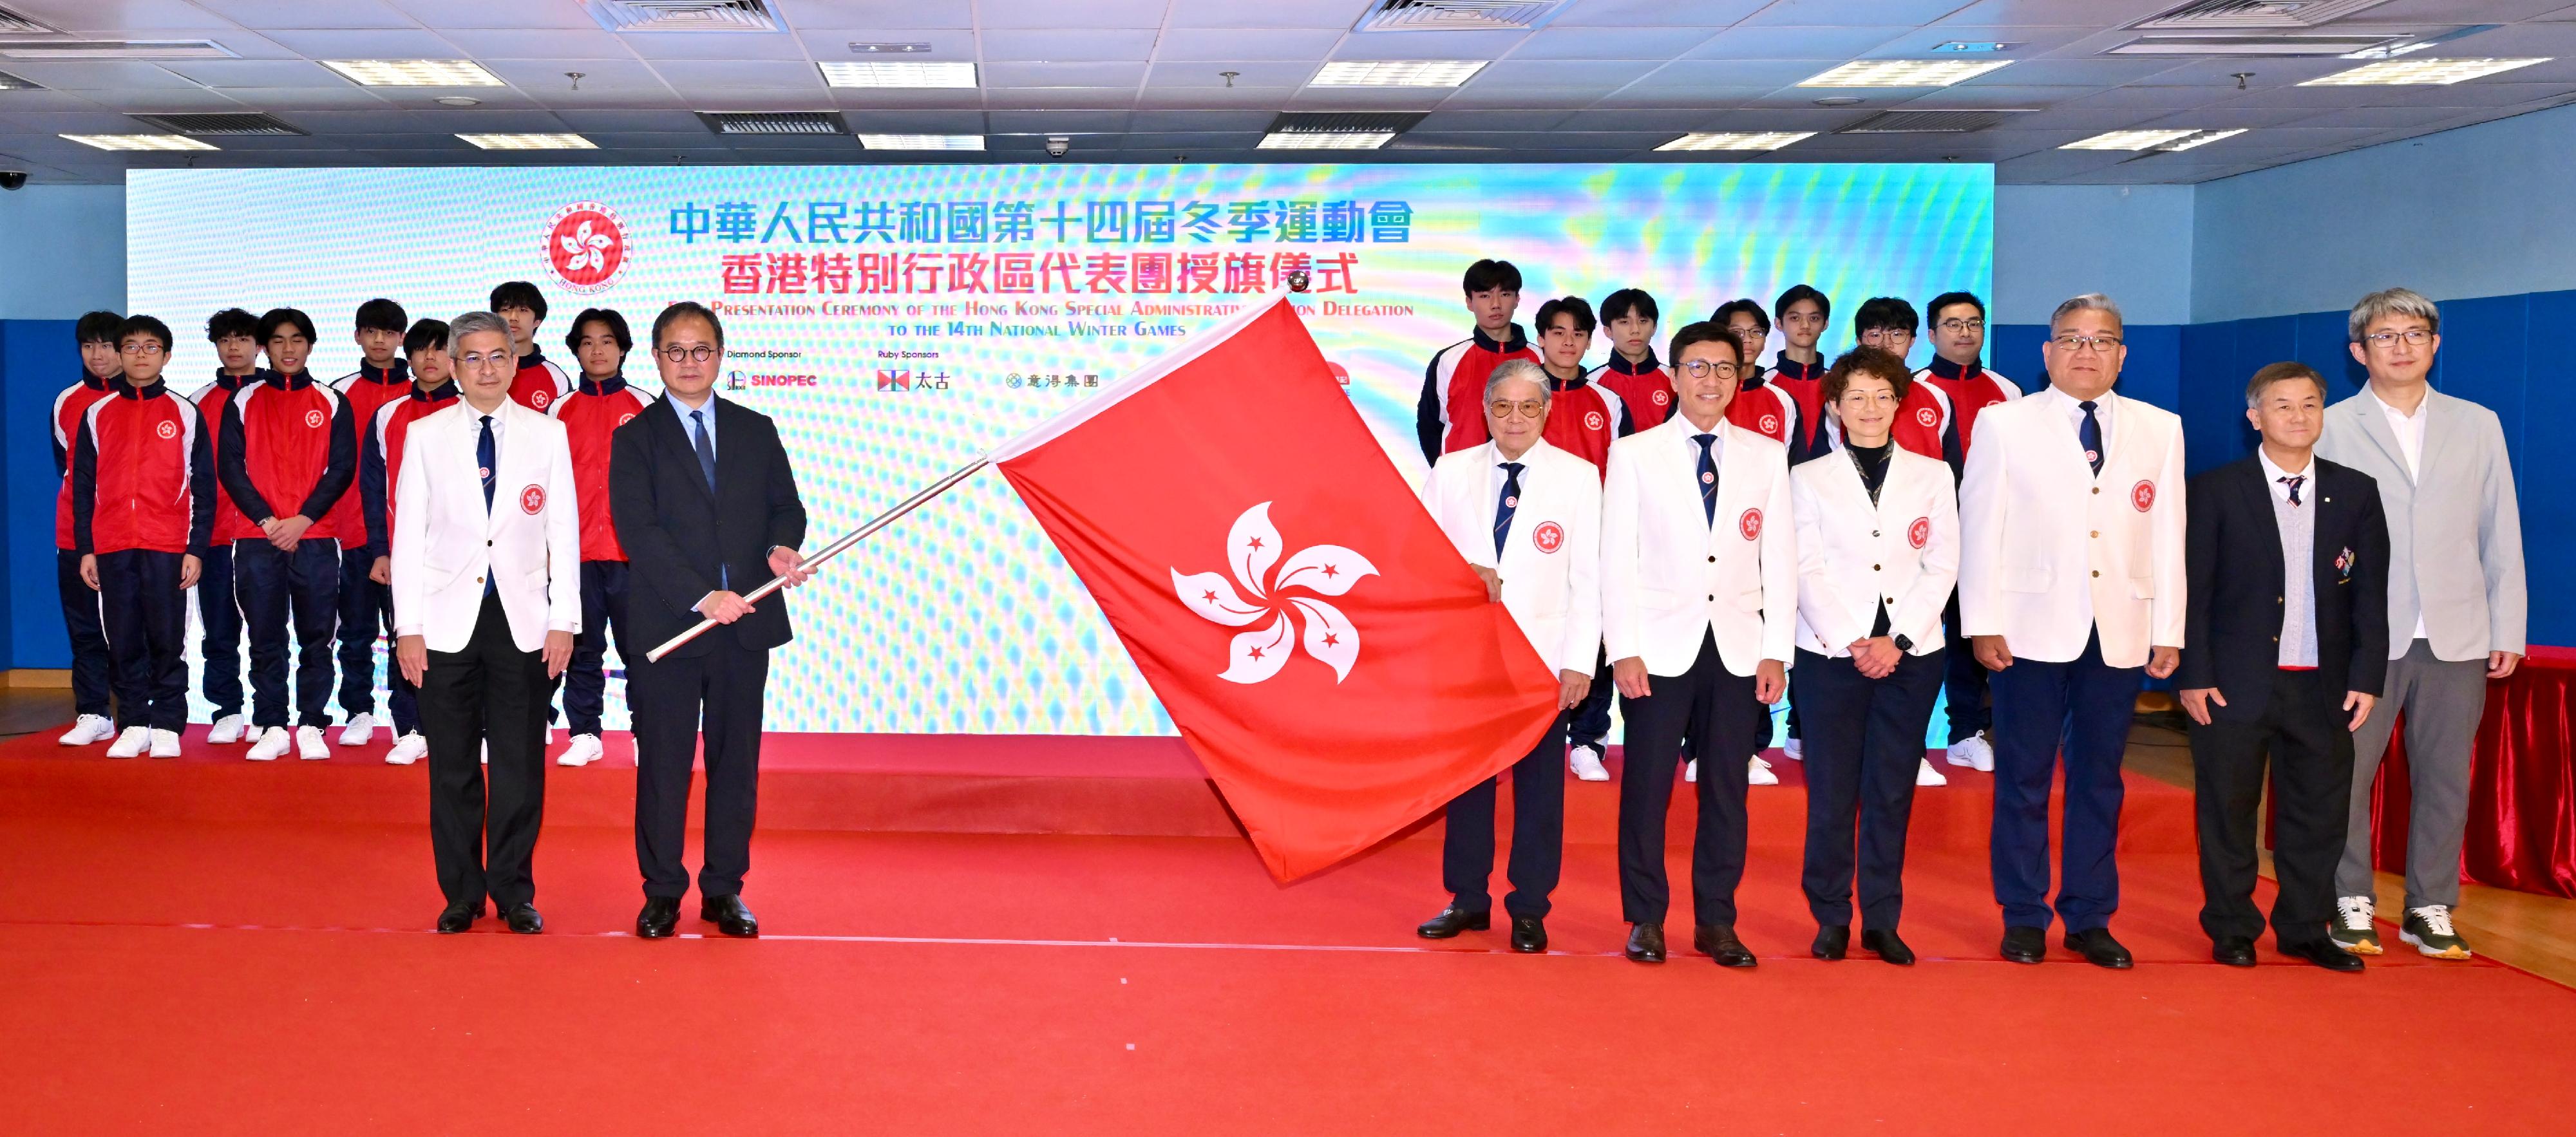 The Permanent Secretary for Culture, Sports and Tourism, Mr Joe Wong, officiated at the flag presentation ceremony for the Delegation to the 14th National Winter Games at the Secondary Hall of the Kowloon Park Sports Centre today (February 2). Photo shows Mr Wong (front row, second left) presenting the HKSAR regional flag to the President of the Sports Federation & Olympic Committee of Hong Kong, China and the Head of the HKSAR Delegation, Mr Timothy Fok (front row, sixth right).